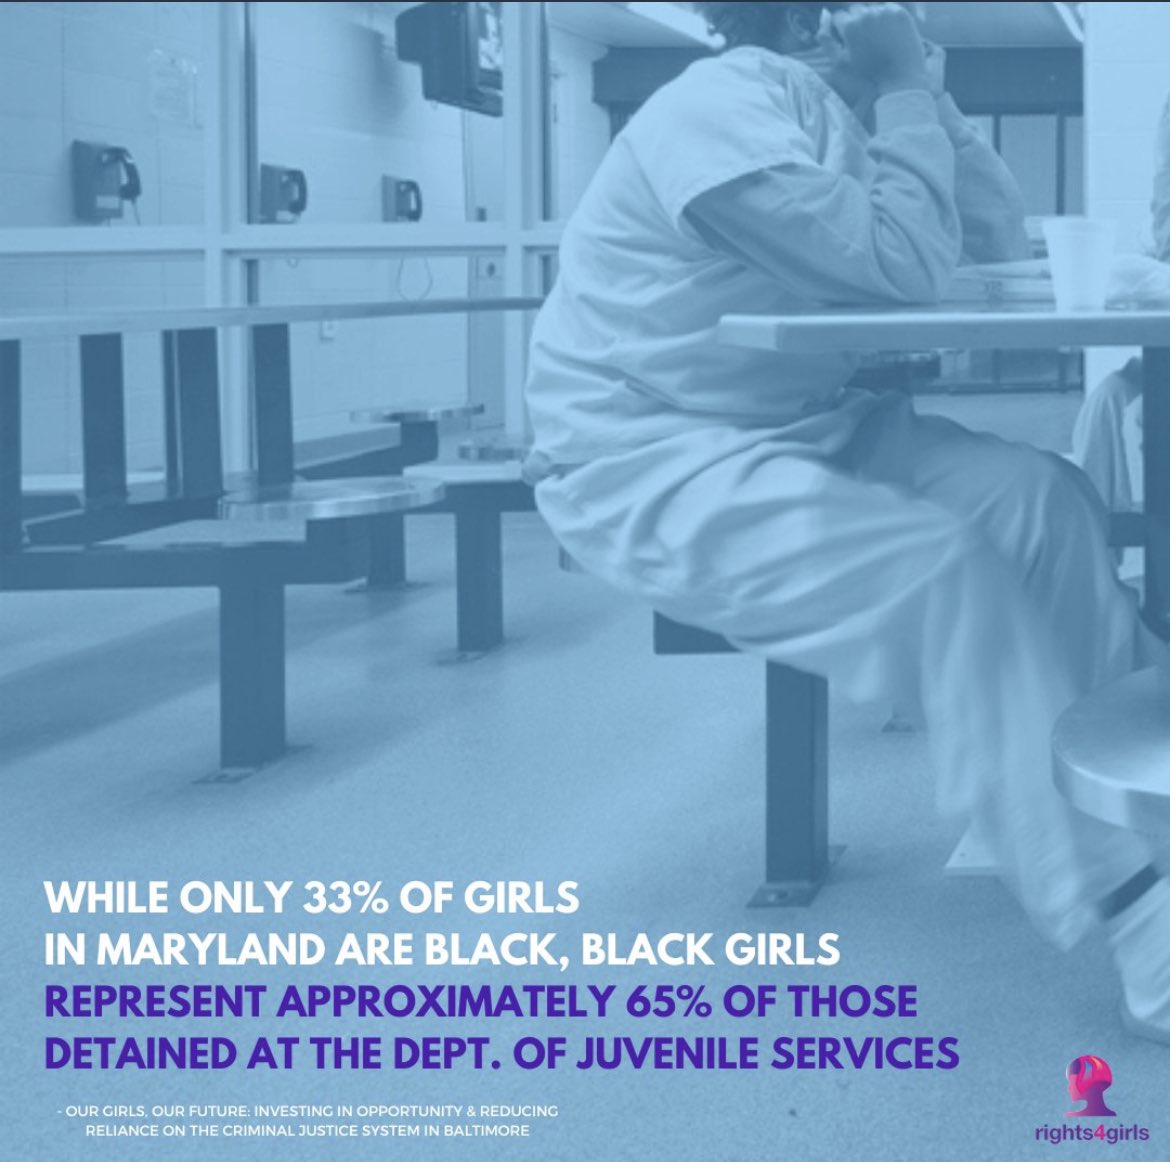 We must address the overrepresentation of Black girls within the youth legal system. #adultificationbias #youthjustice #JJDPAmatters